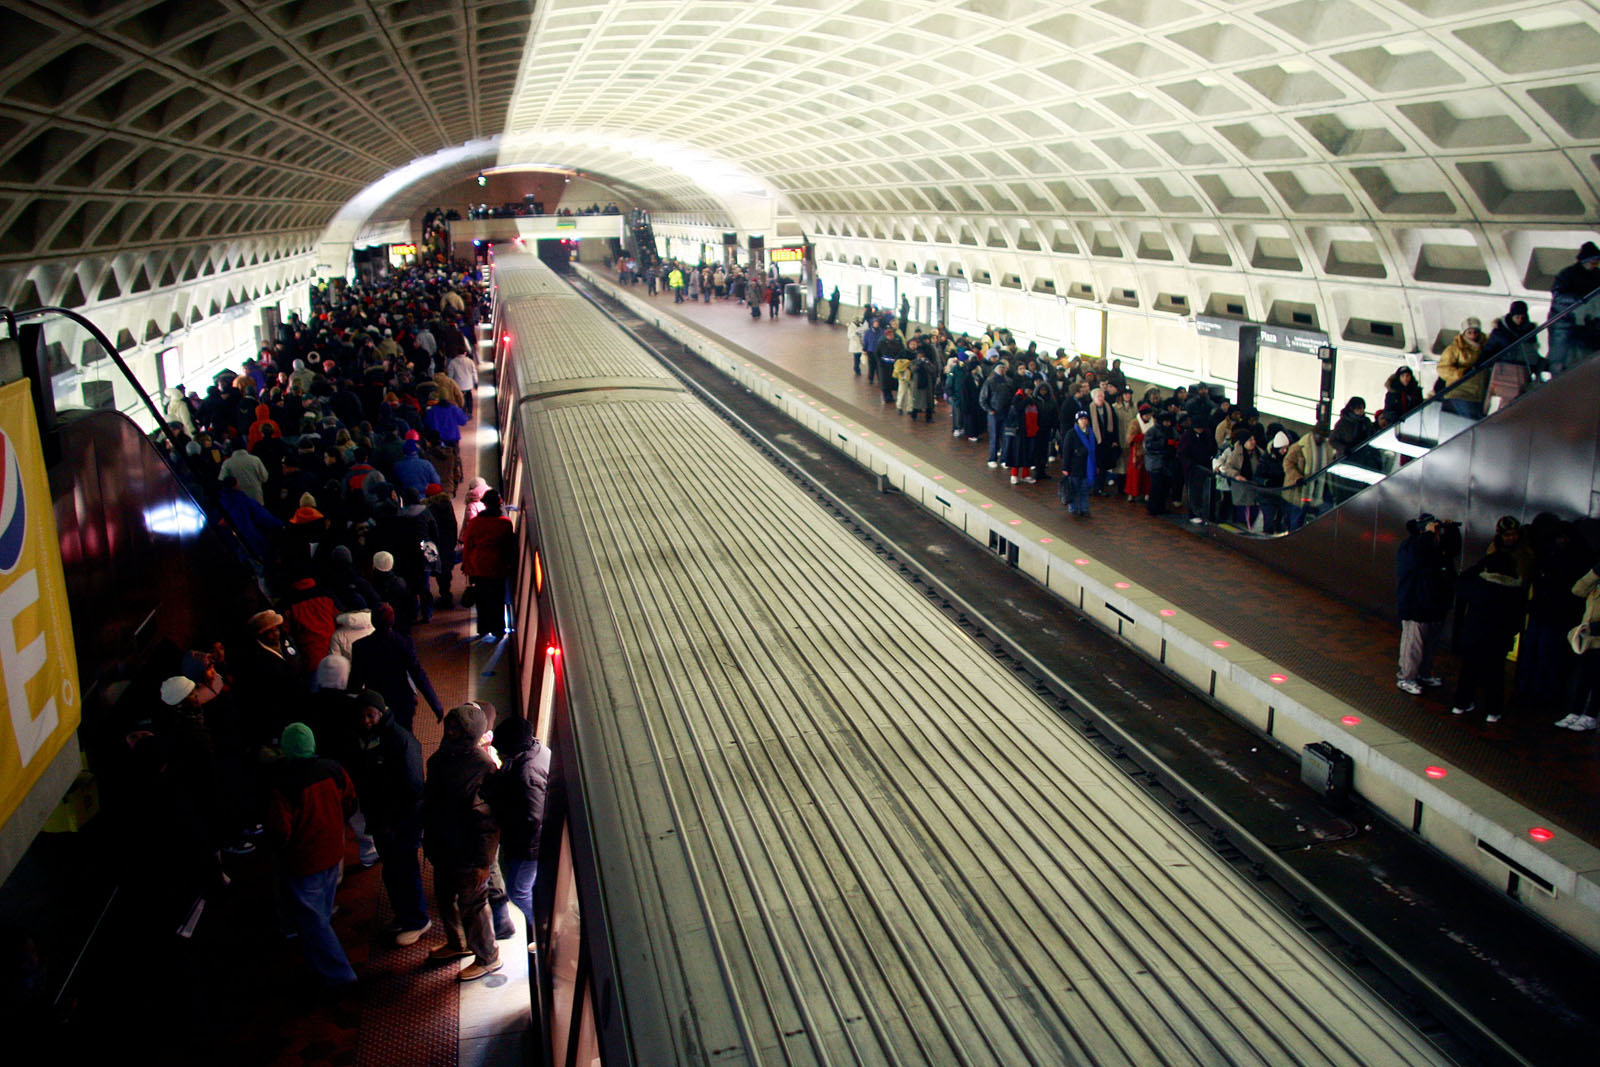 WASHINGTON, D.C. - JANUARY 20:  WASHINGTON, D.C. - JANUARY 20:  People debark the Metro during the inauguration of Barack Obama as the 44th President of the United States of America January 20, 2009 in Washington, DC. Obama becomes the first African-American to be elected to the office of President in the history of the United States.  (Photo by Mario Tama/Getty Images)